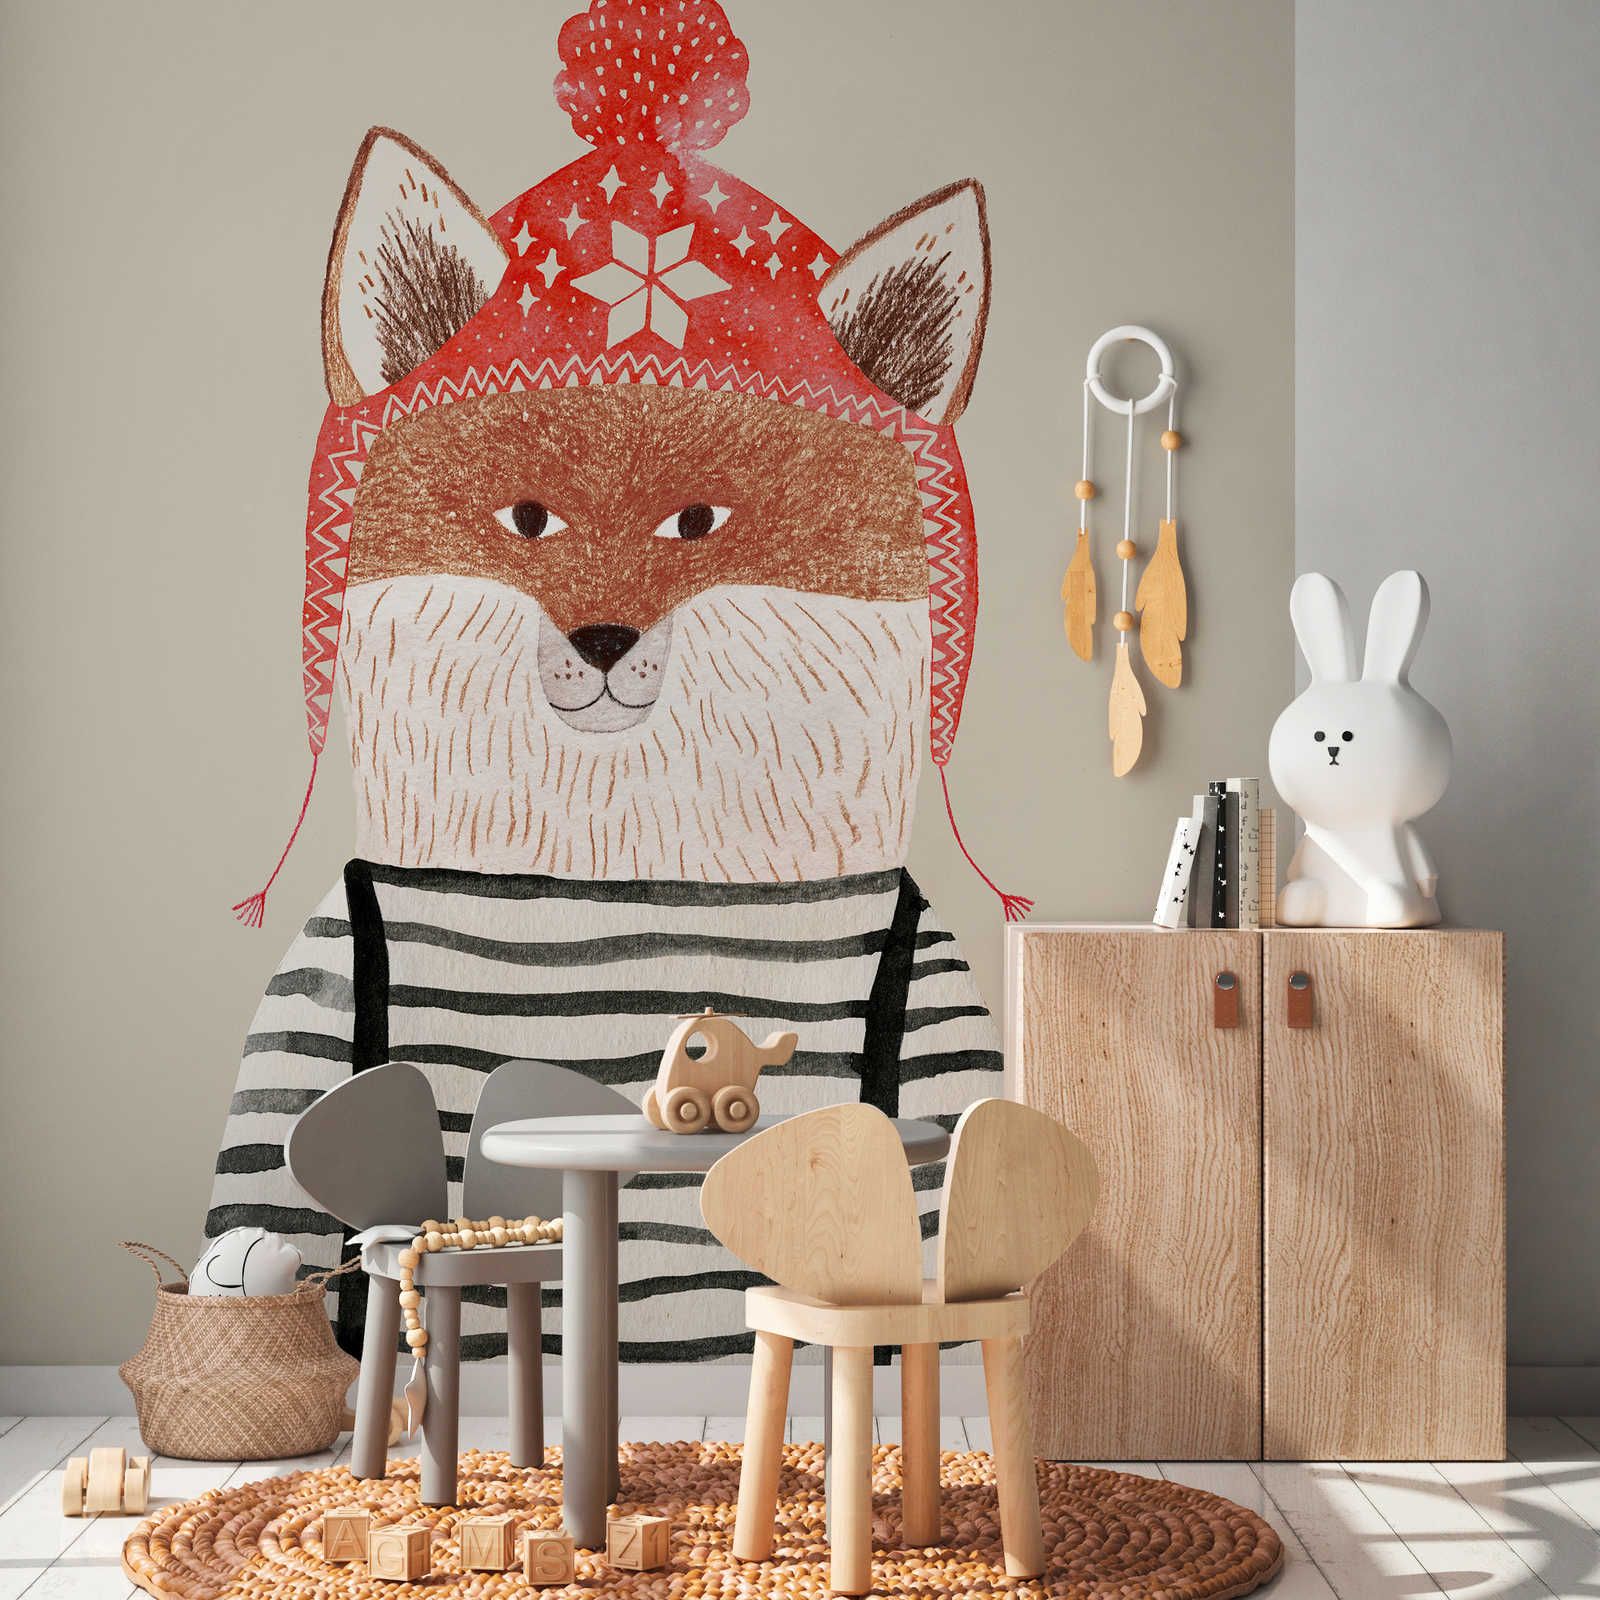 Fox with pom-pom hat mural - Smooth & pearlescent fleece
